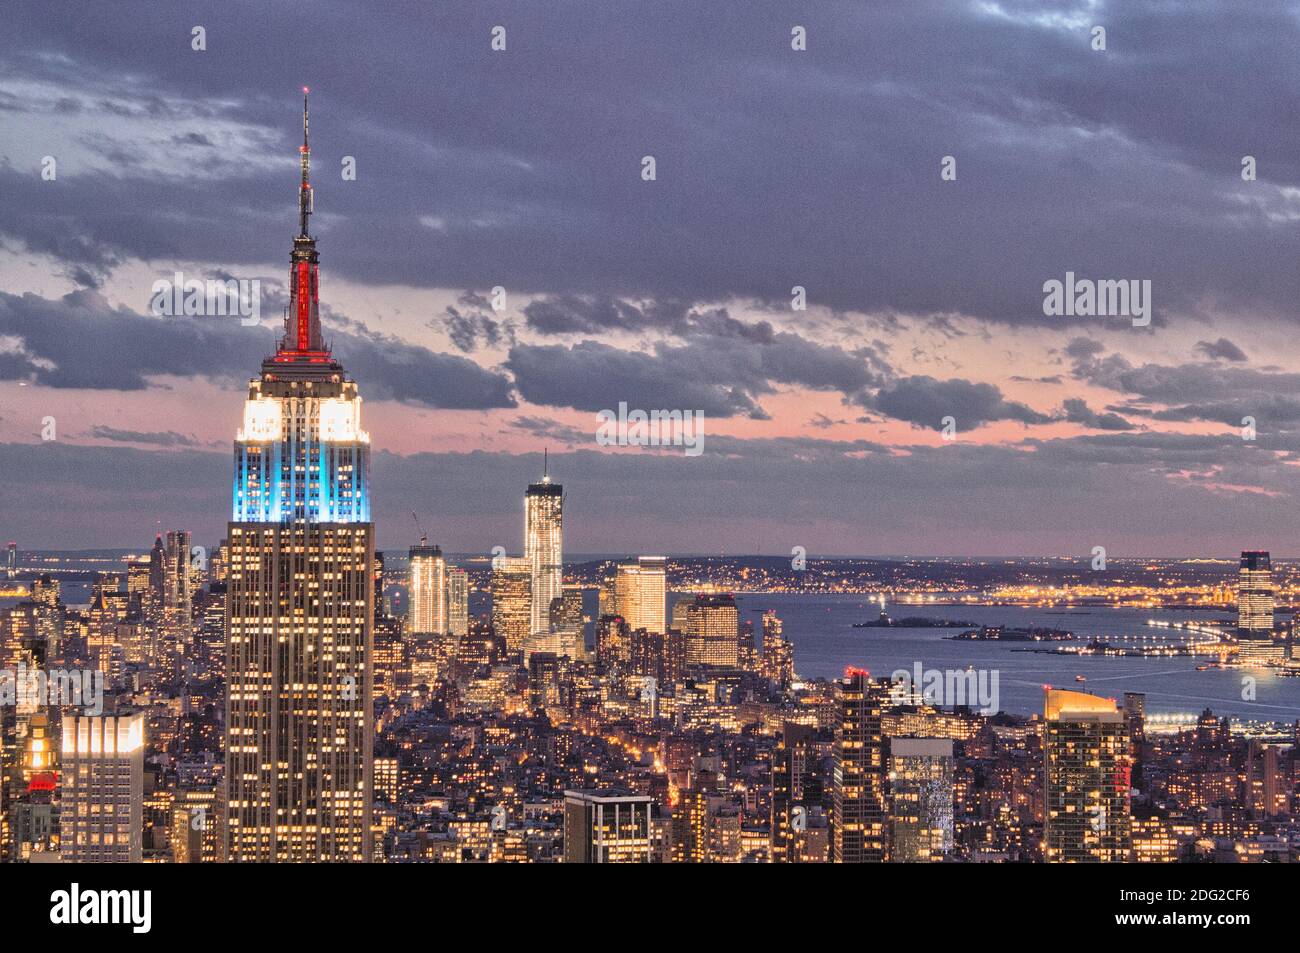 The tight cluster of skyscrapers habituating midtown Manhattan with the famous Empire State Building most prominent. Stock Photo